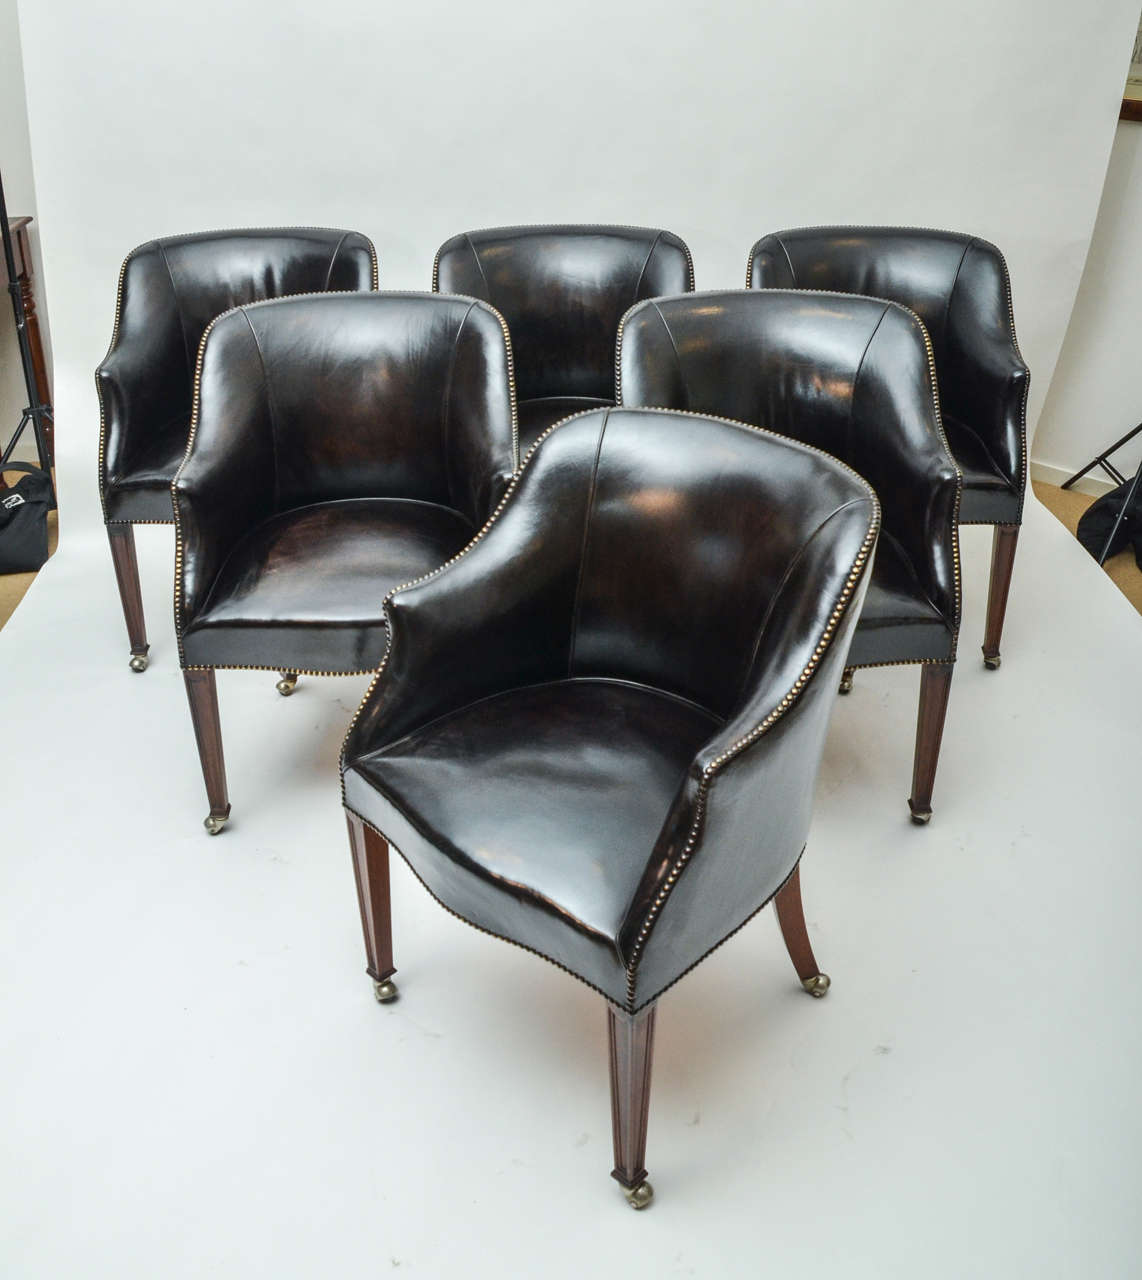 A set of six leather upholstered chairs from the Carlton Club in London, brass studs, mahogany legs, and original casters. Pair available: $3,500